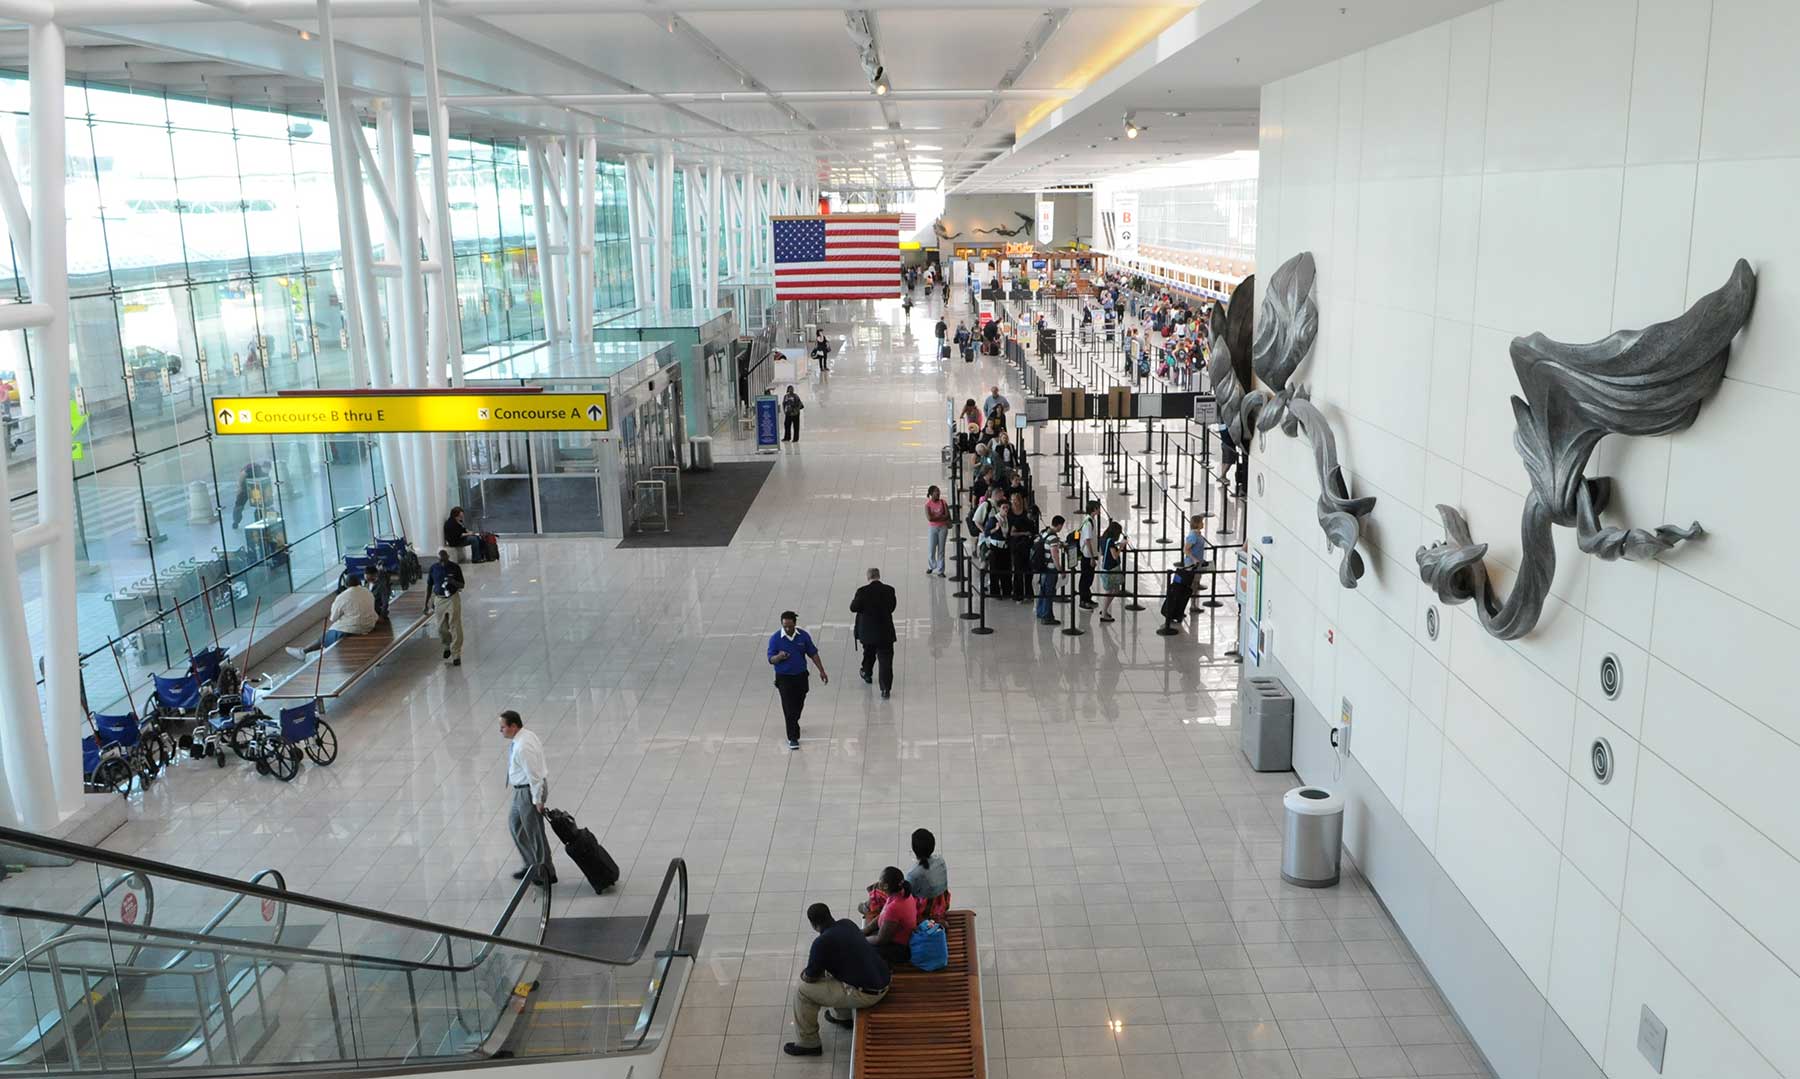 People moving about an airport terminal.